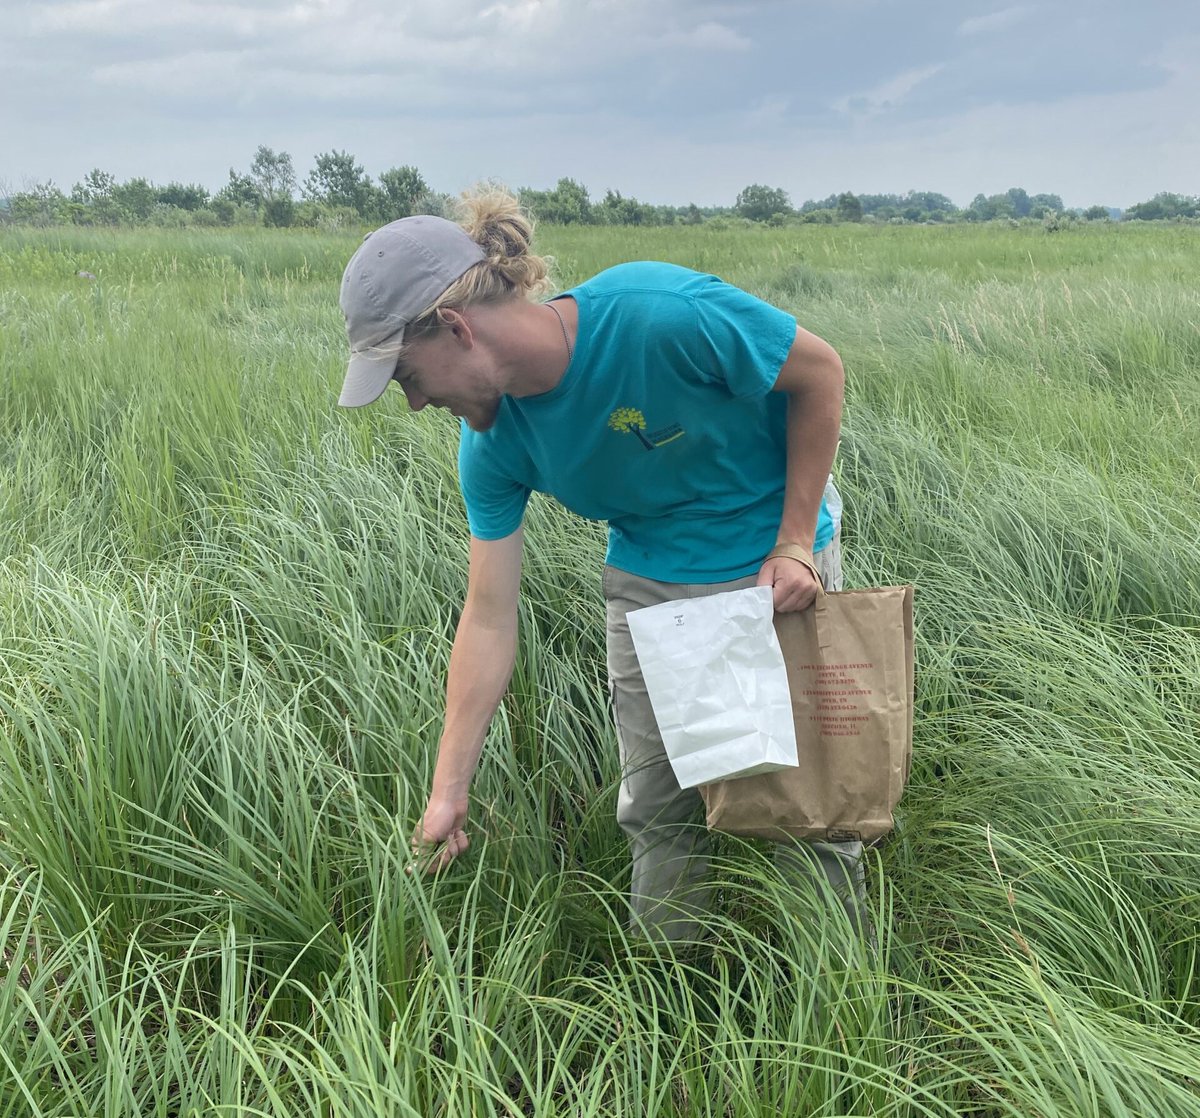 The Garden is now accepting applications for its #Conservation and Land Management Program! These internships focus on Native Seed Collection at National Forests and Grassland locations across the county. Learn more and apply: chgobg.org/3VW6jbz